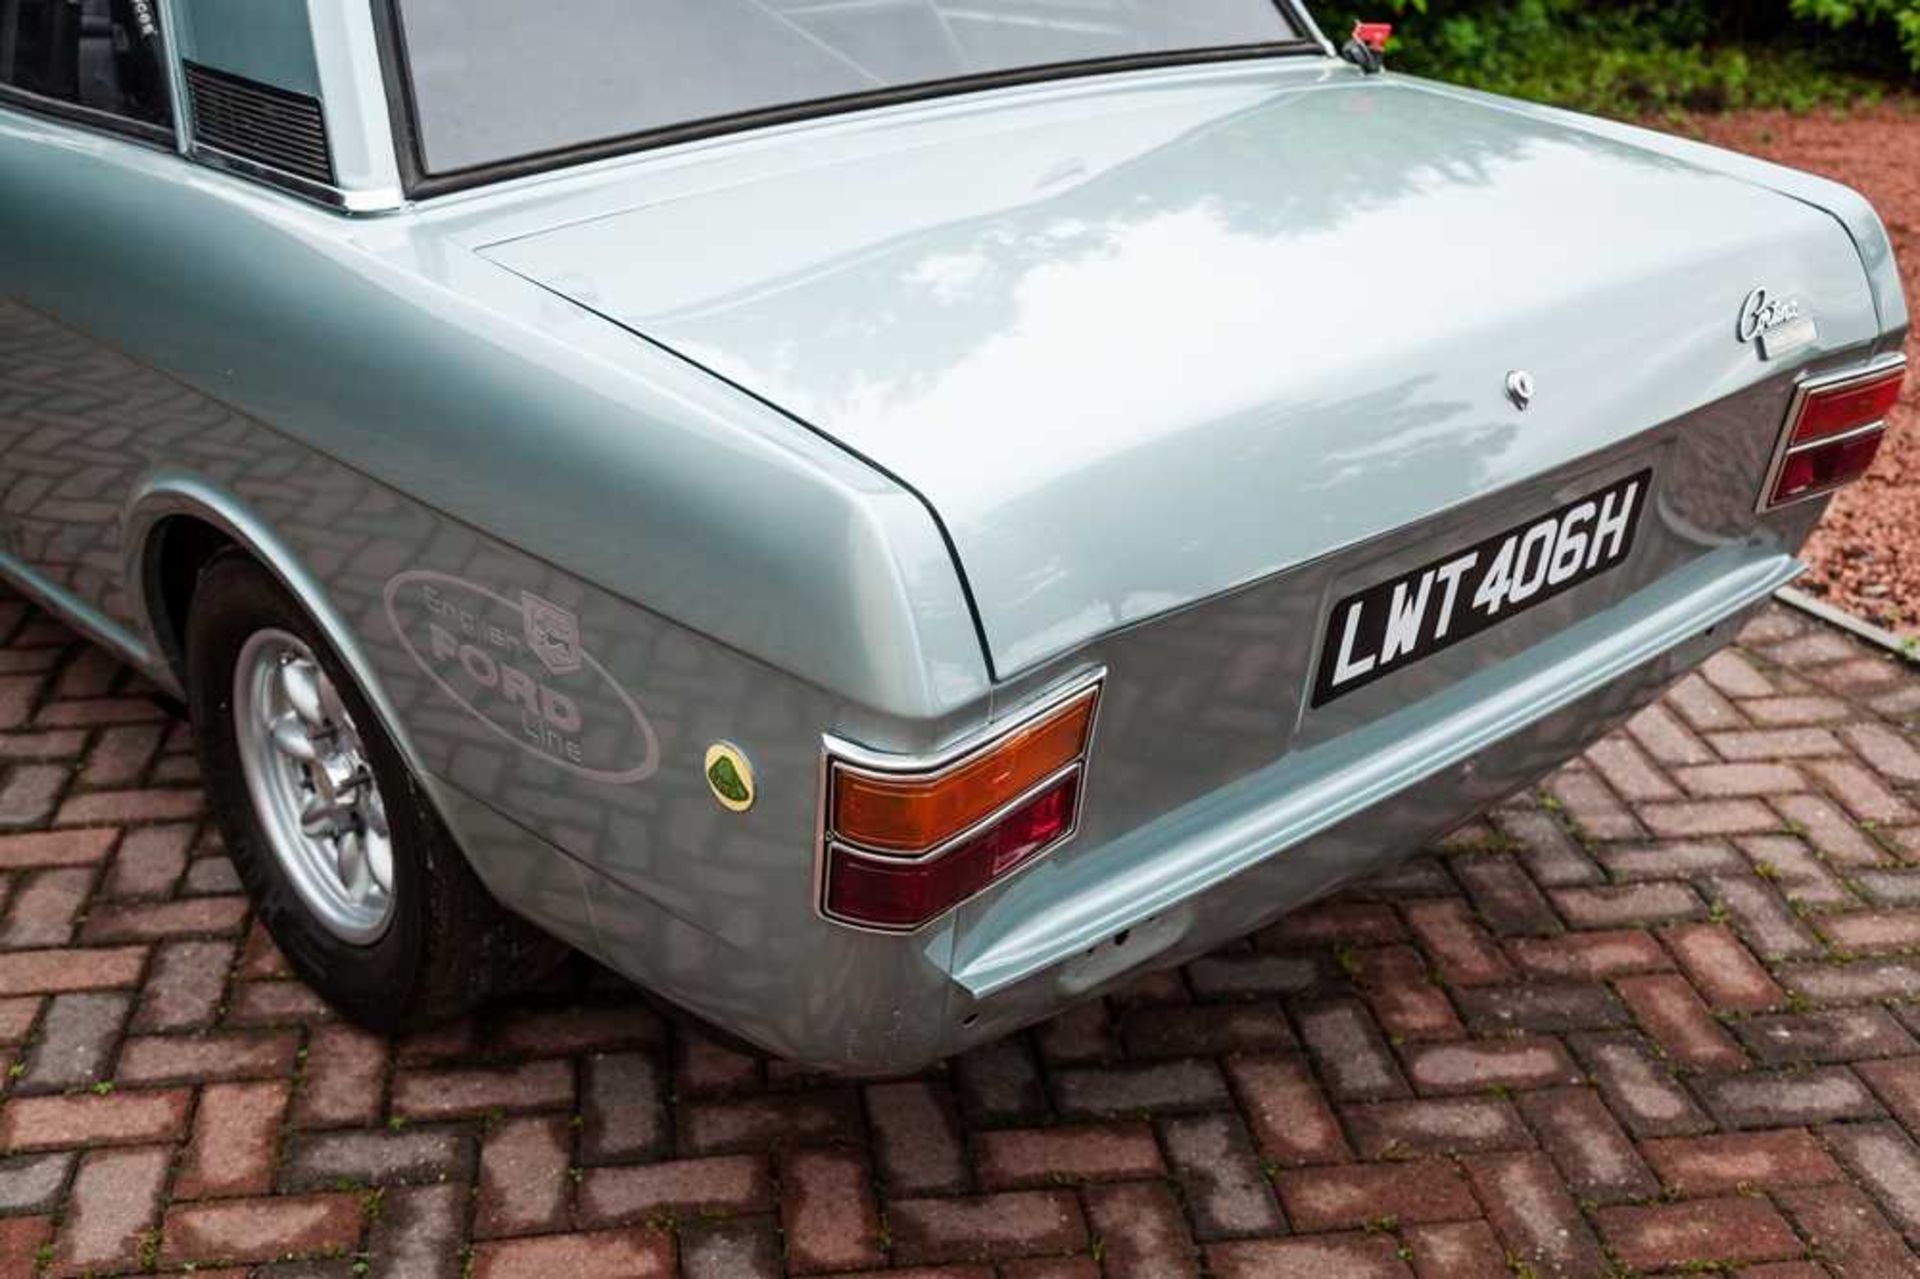 1969 Ford Cortina 'Lotus' Competition Saloon Powered by a 1598cc FIA-legal Lotus Twin-Cam with Twin - Image 7 of 55